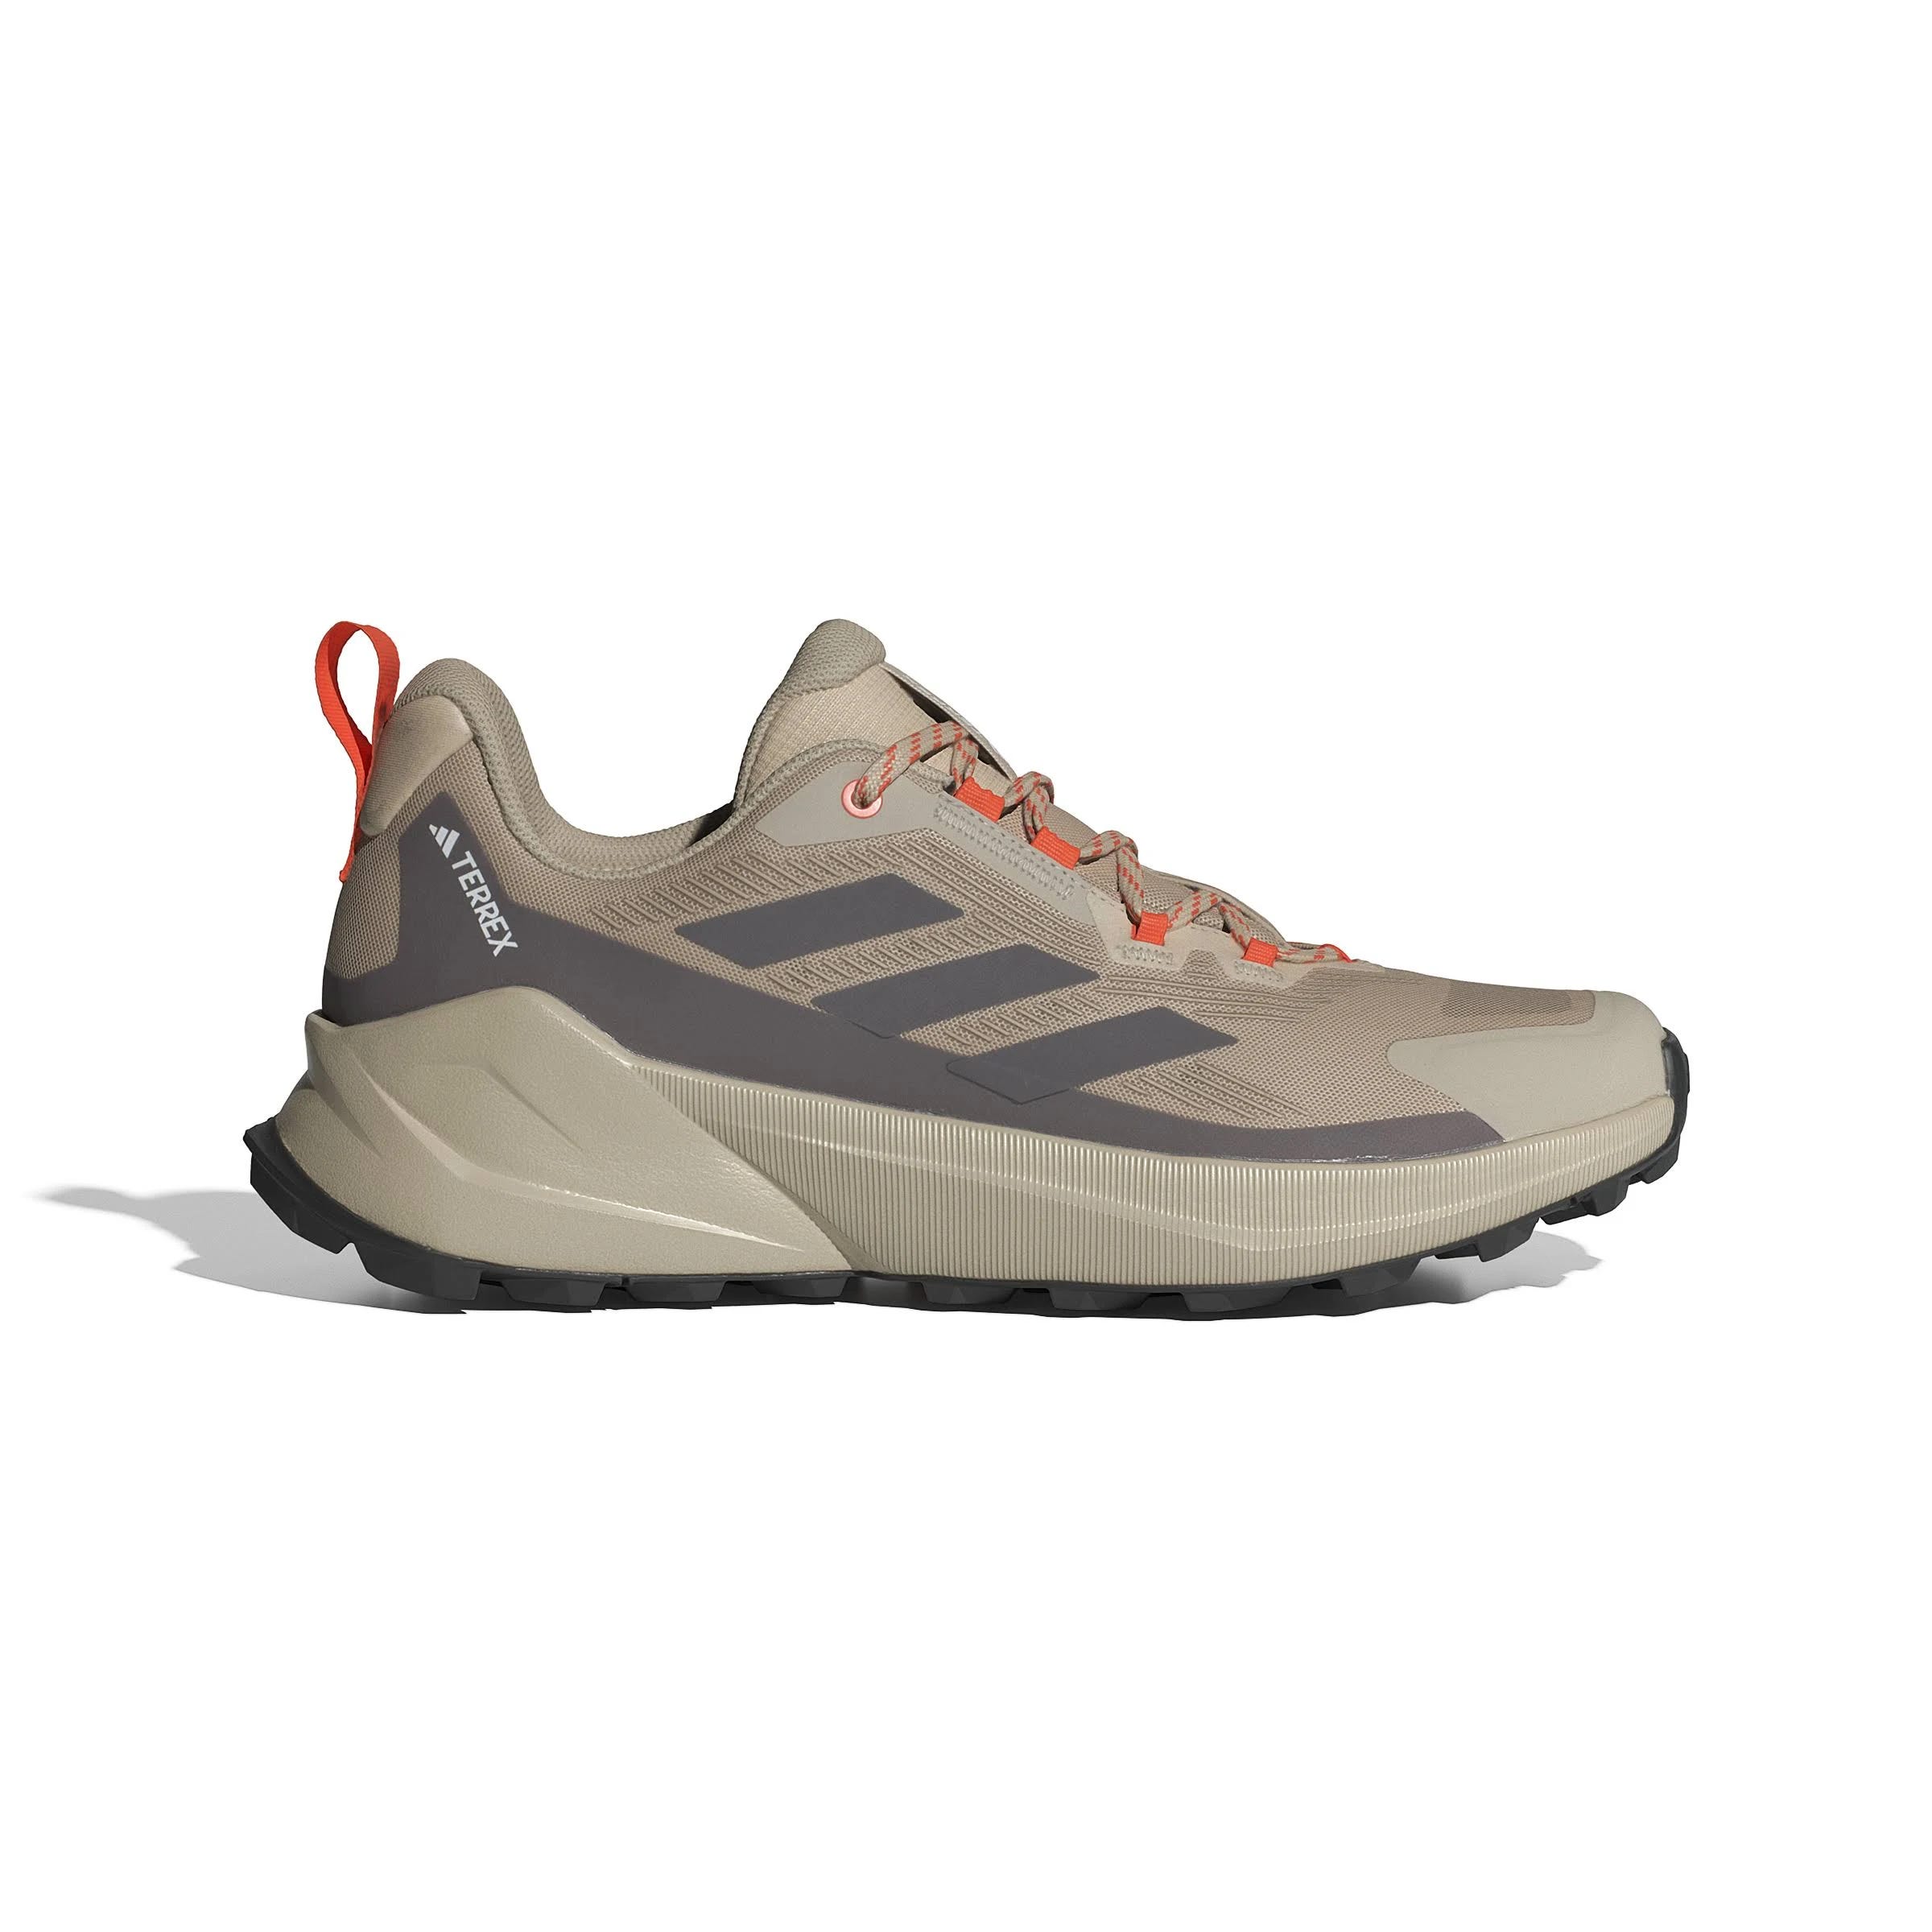 Lightweight, supportive Adidas Terrex Trailmaker 2.0 Hiking Shoes | Image